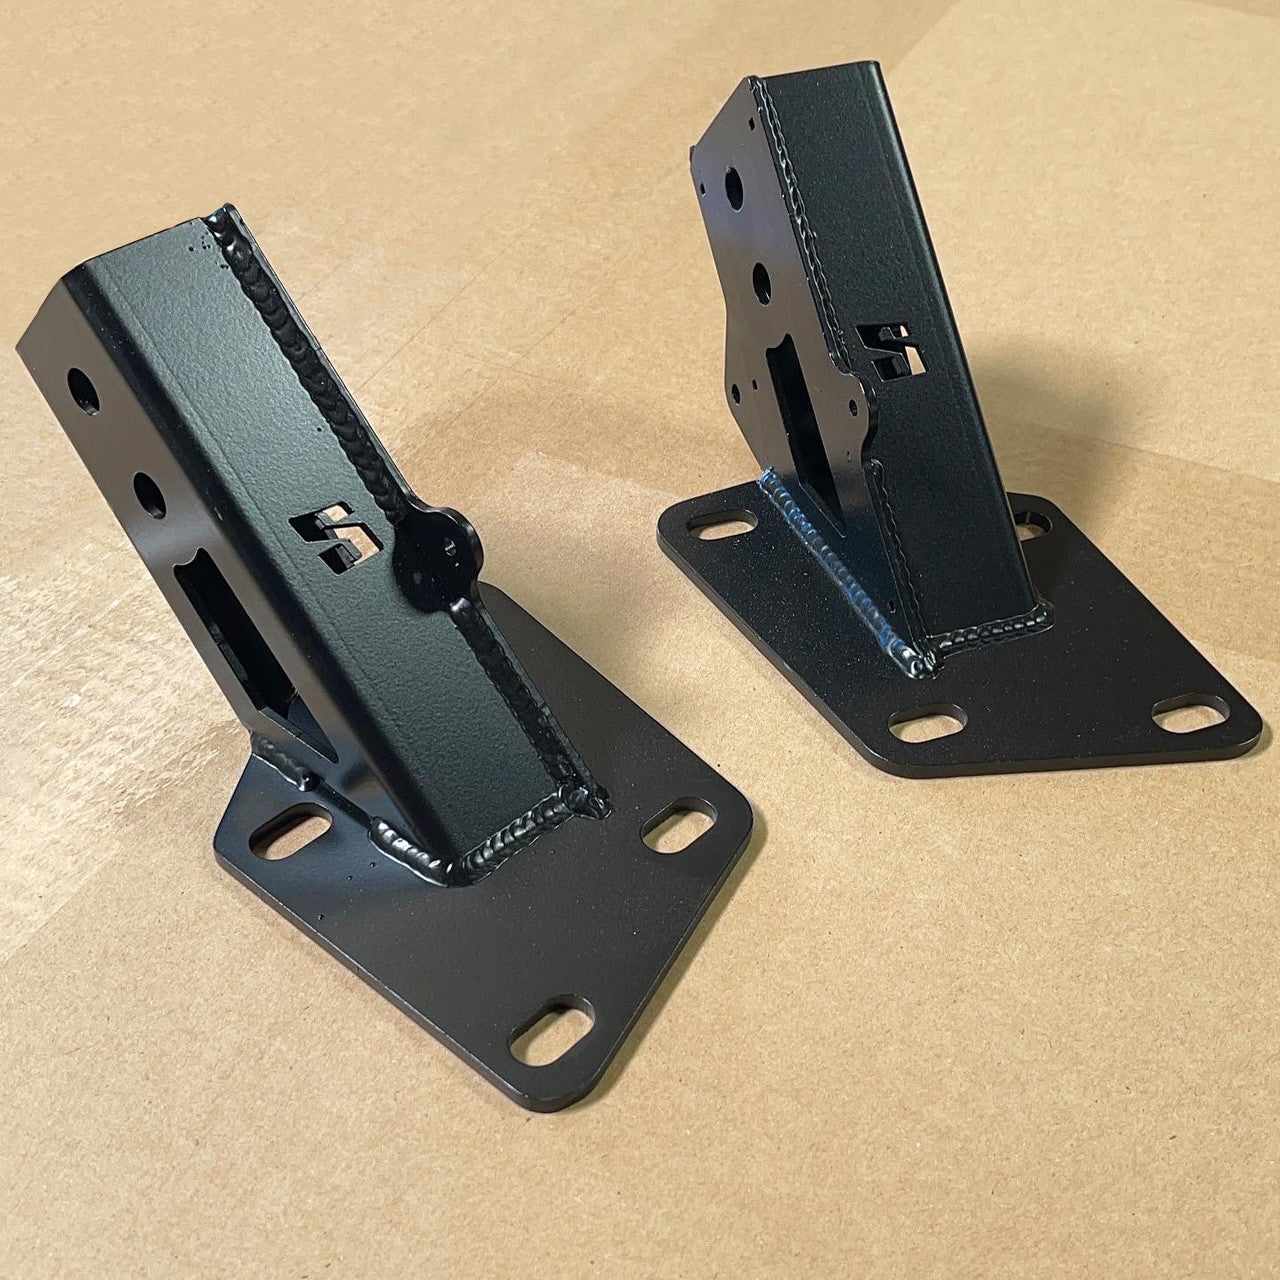 SDR X3 Chassis Mount Adapters